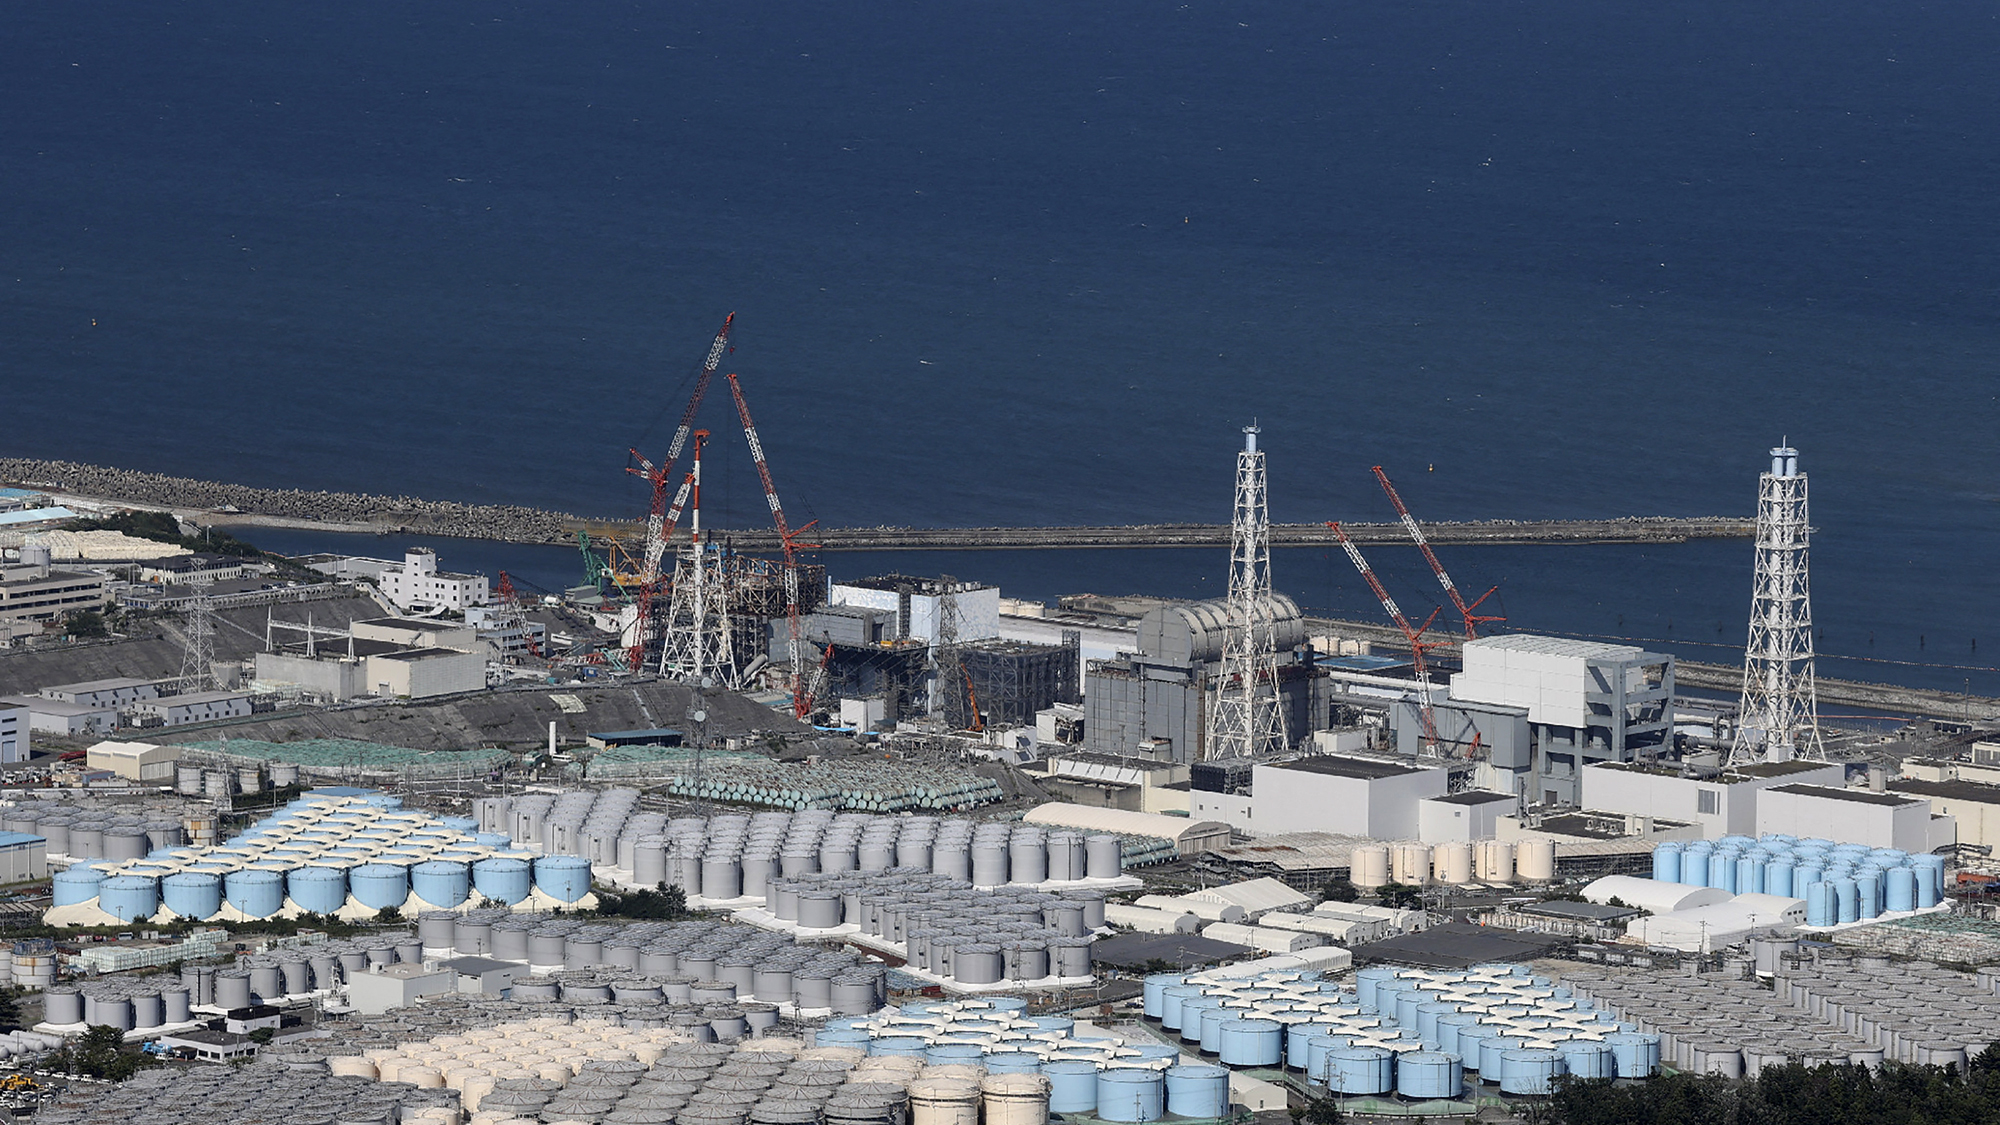 Japan begins releasing treated Fukushima waste water into the Pacific Ocean